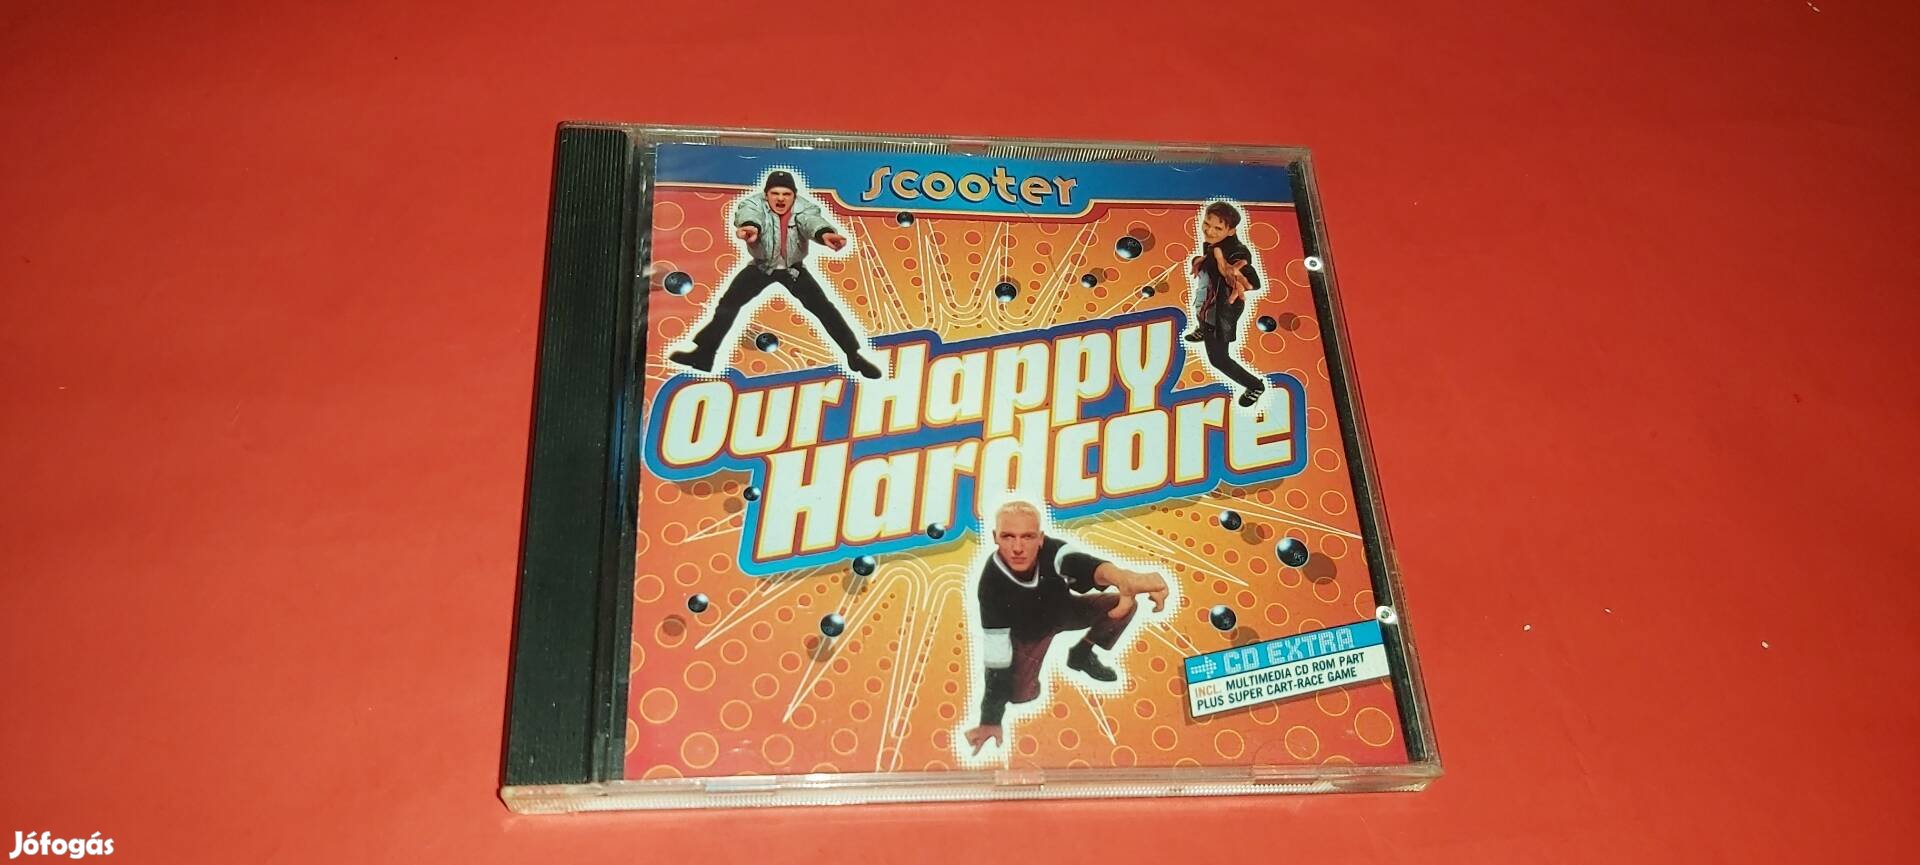 Scooter Our happy hardcore Cd 1996